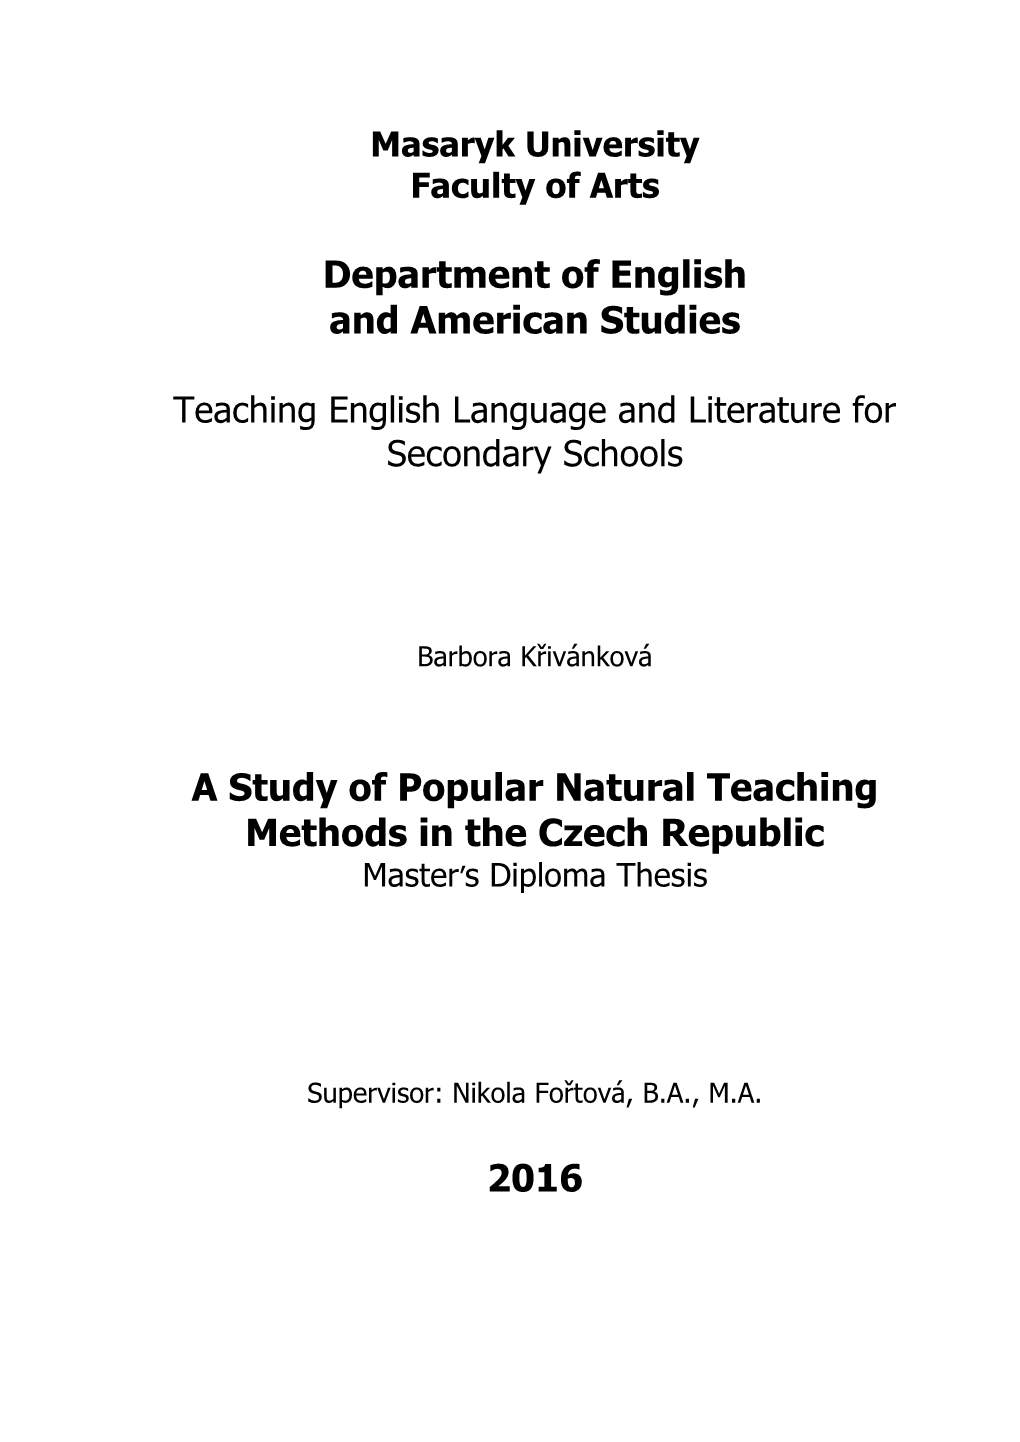 Department of English and American Studies a Study of Popular Natural